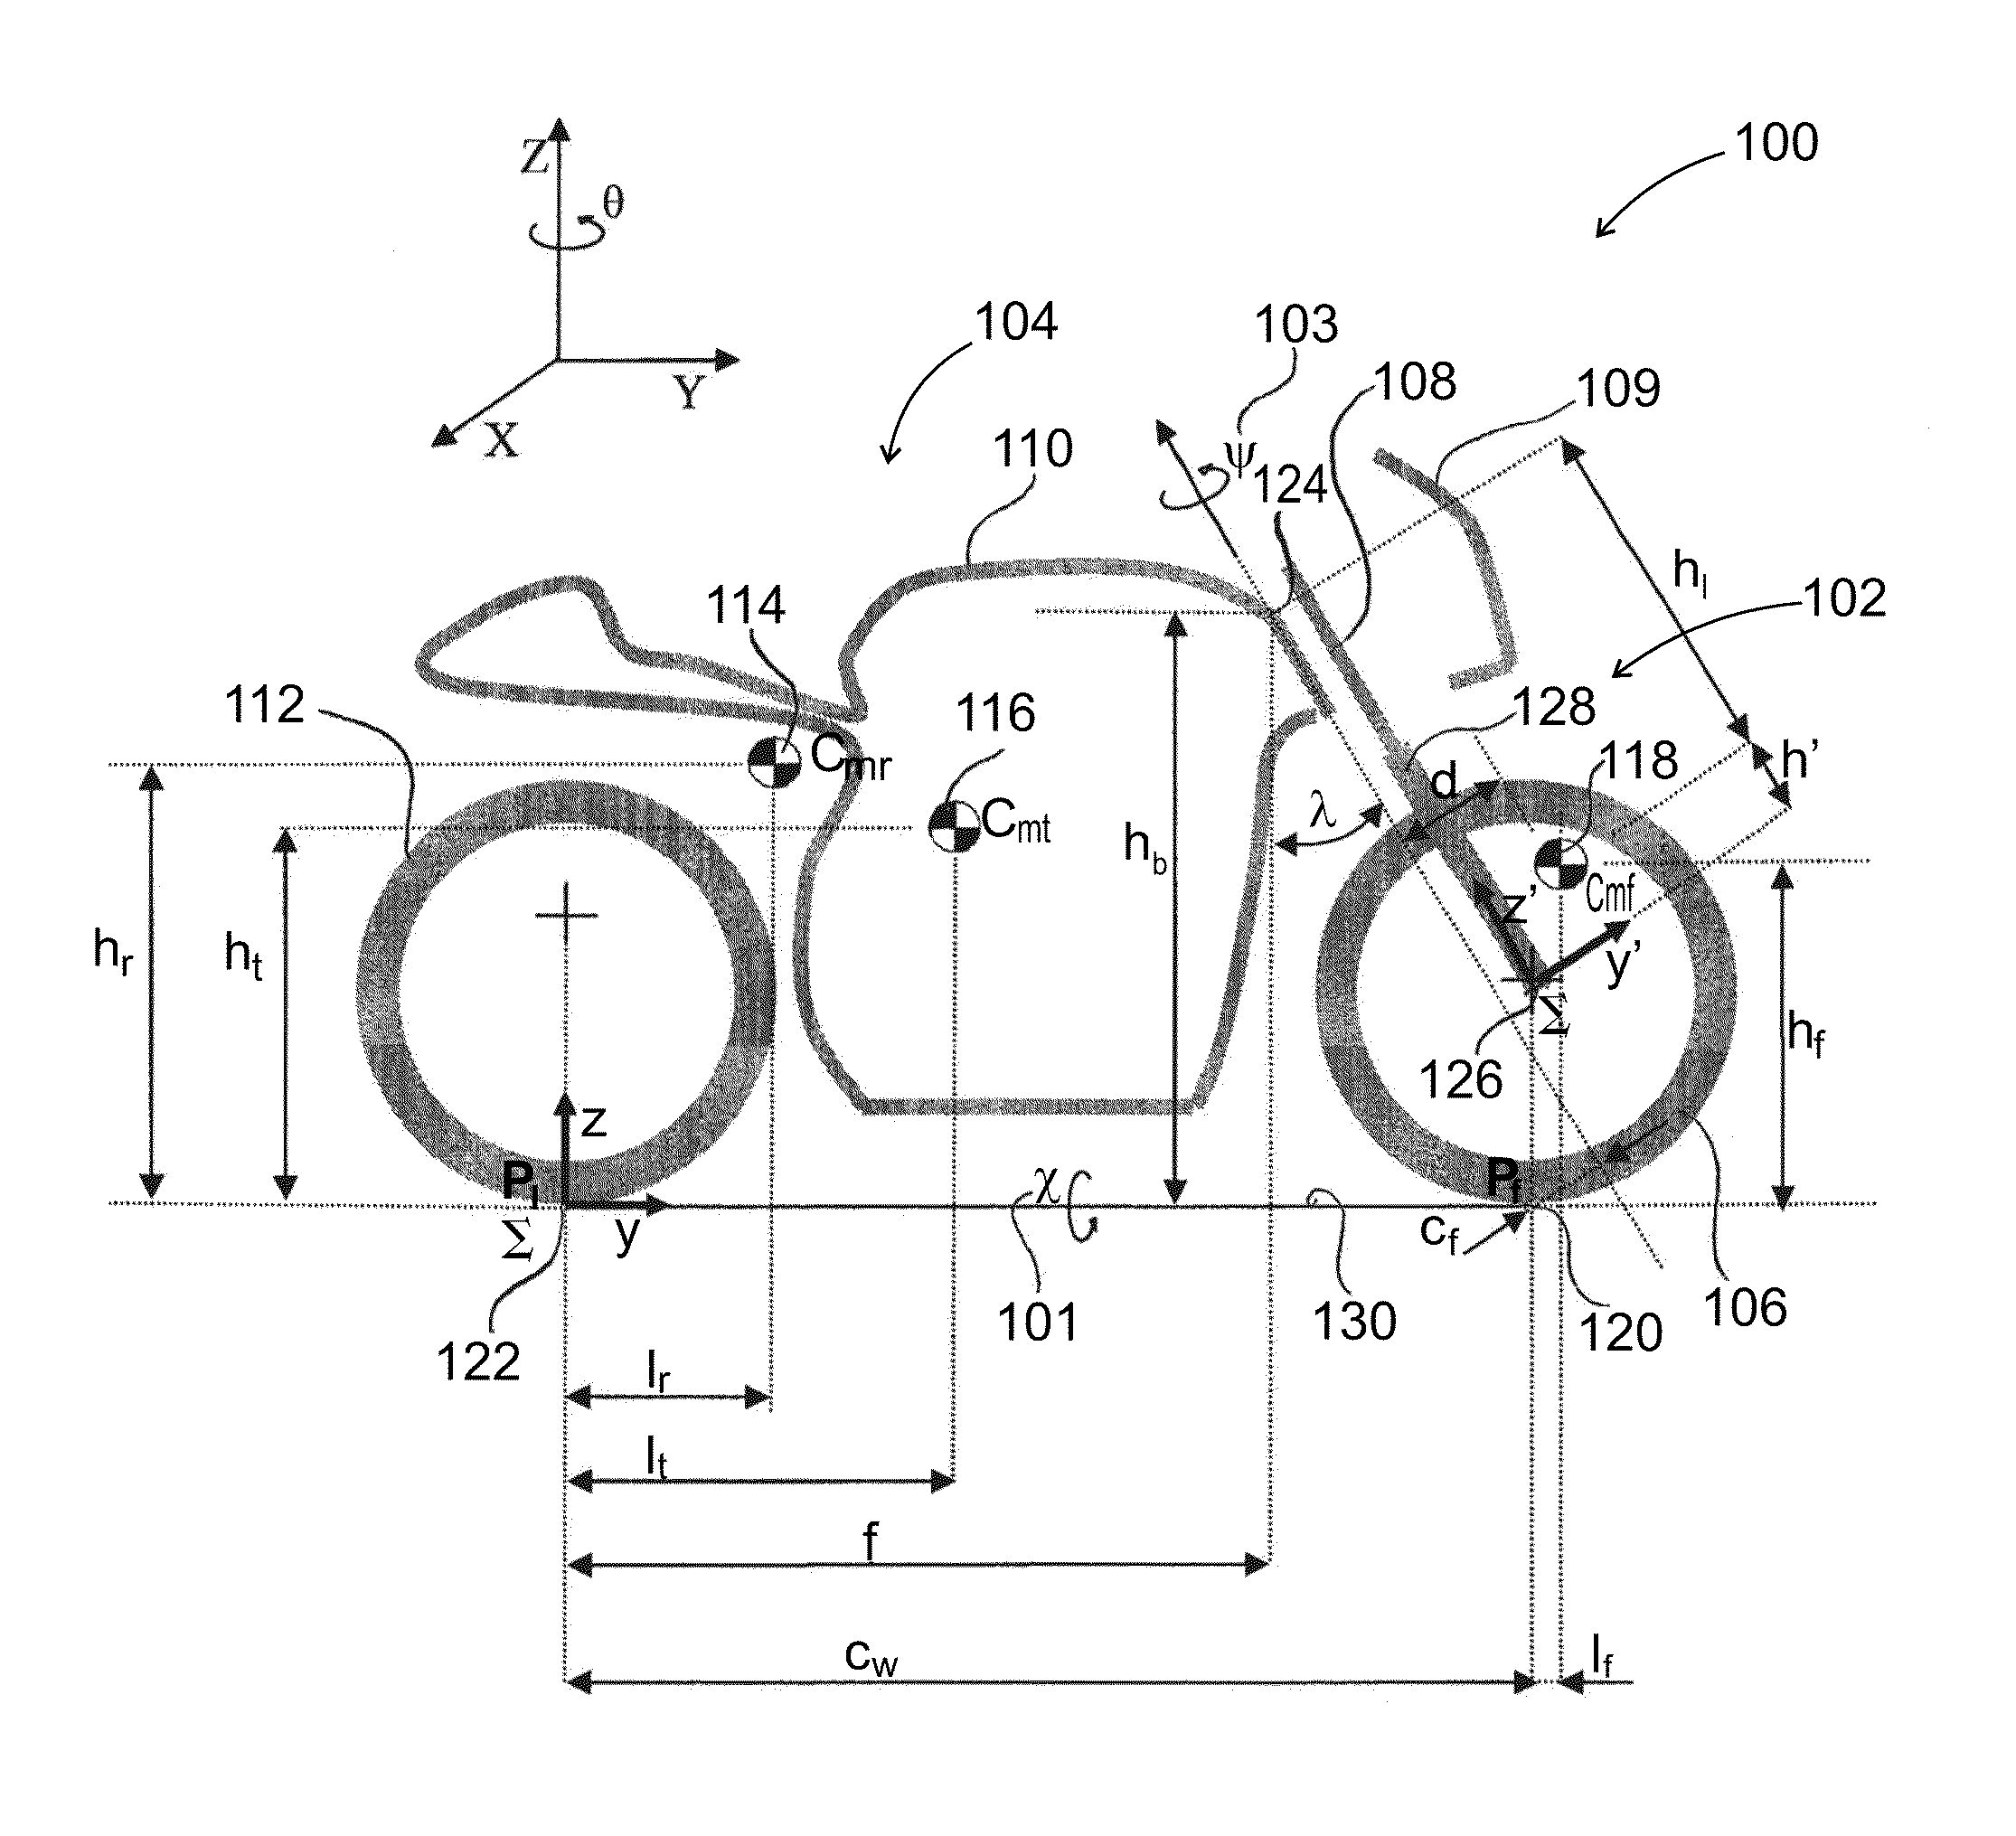 System and method for stabilizing a single-track vehicle